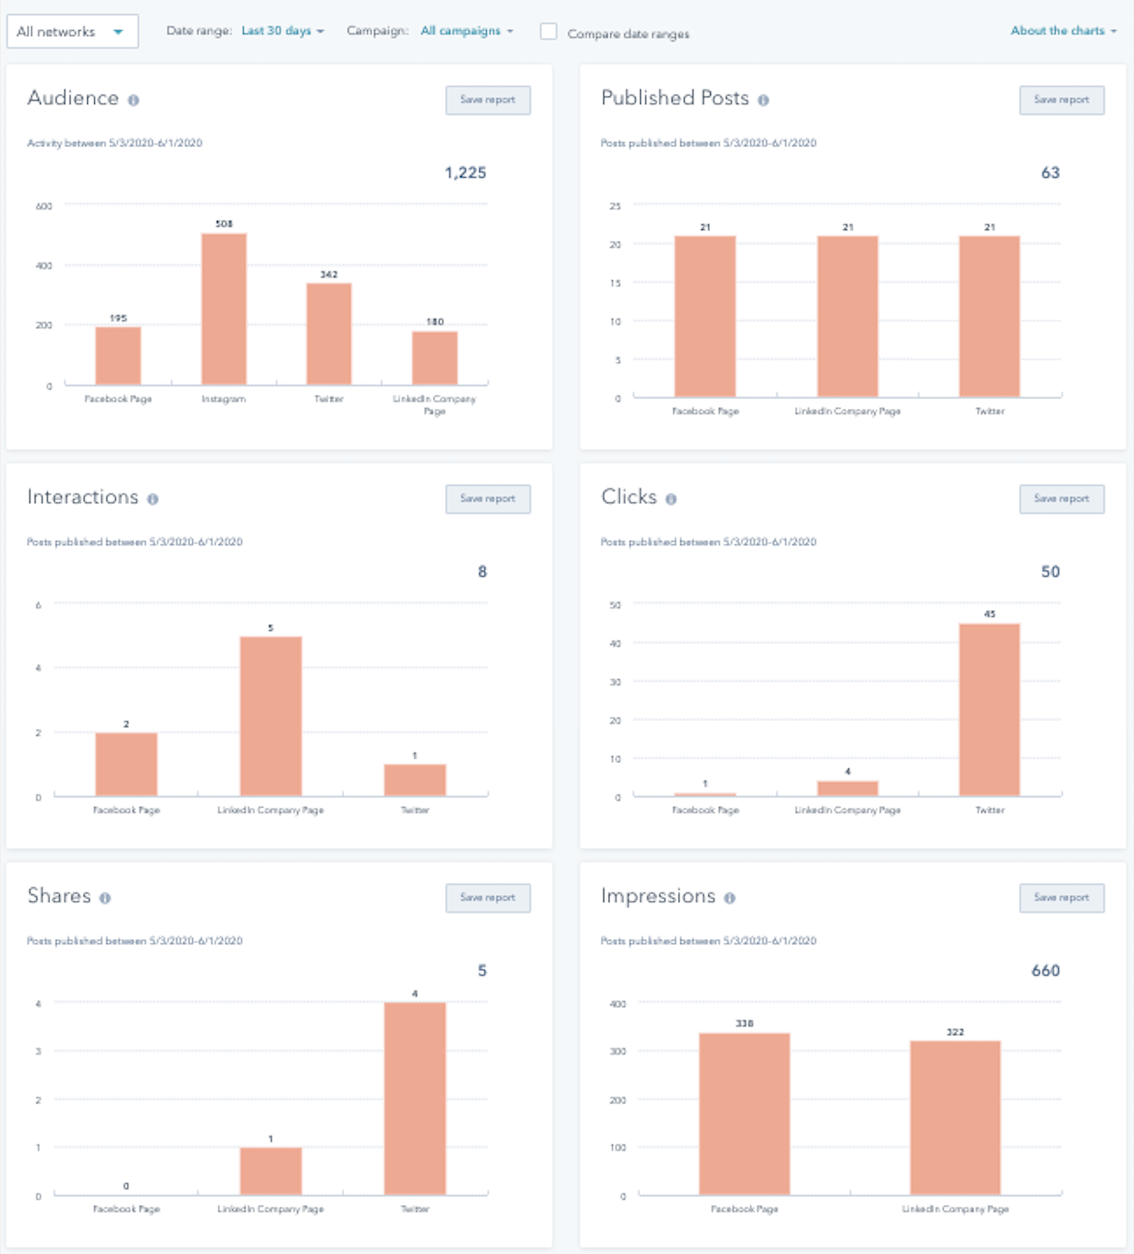 HubSpot marketing statistics and the social media reporting features